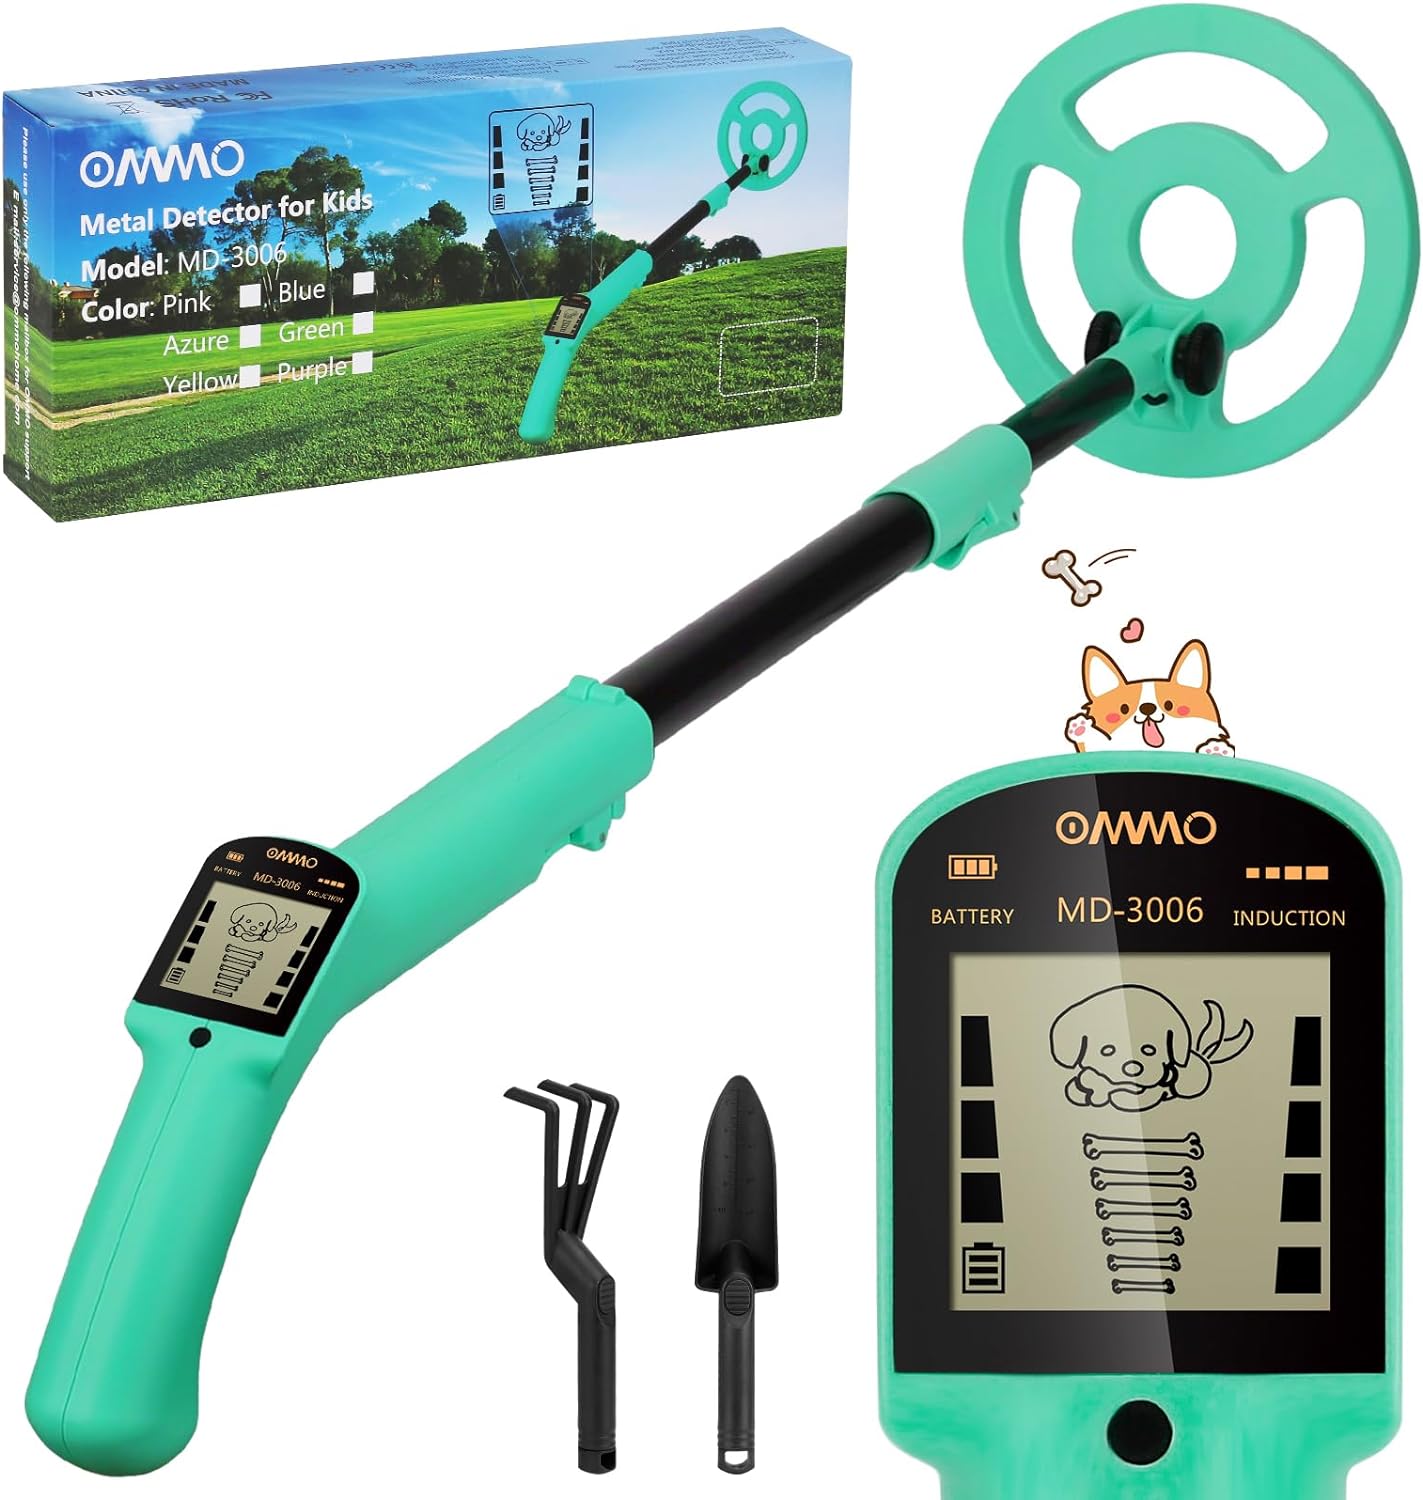 OMMO Metal Detector, Adjustable 27.5”-37.8” Metal Detector for Kids with Intuitive LCD Display, Lightweight Kids Metal Detectors with 6” Search Coil for Exploration Hiking